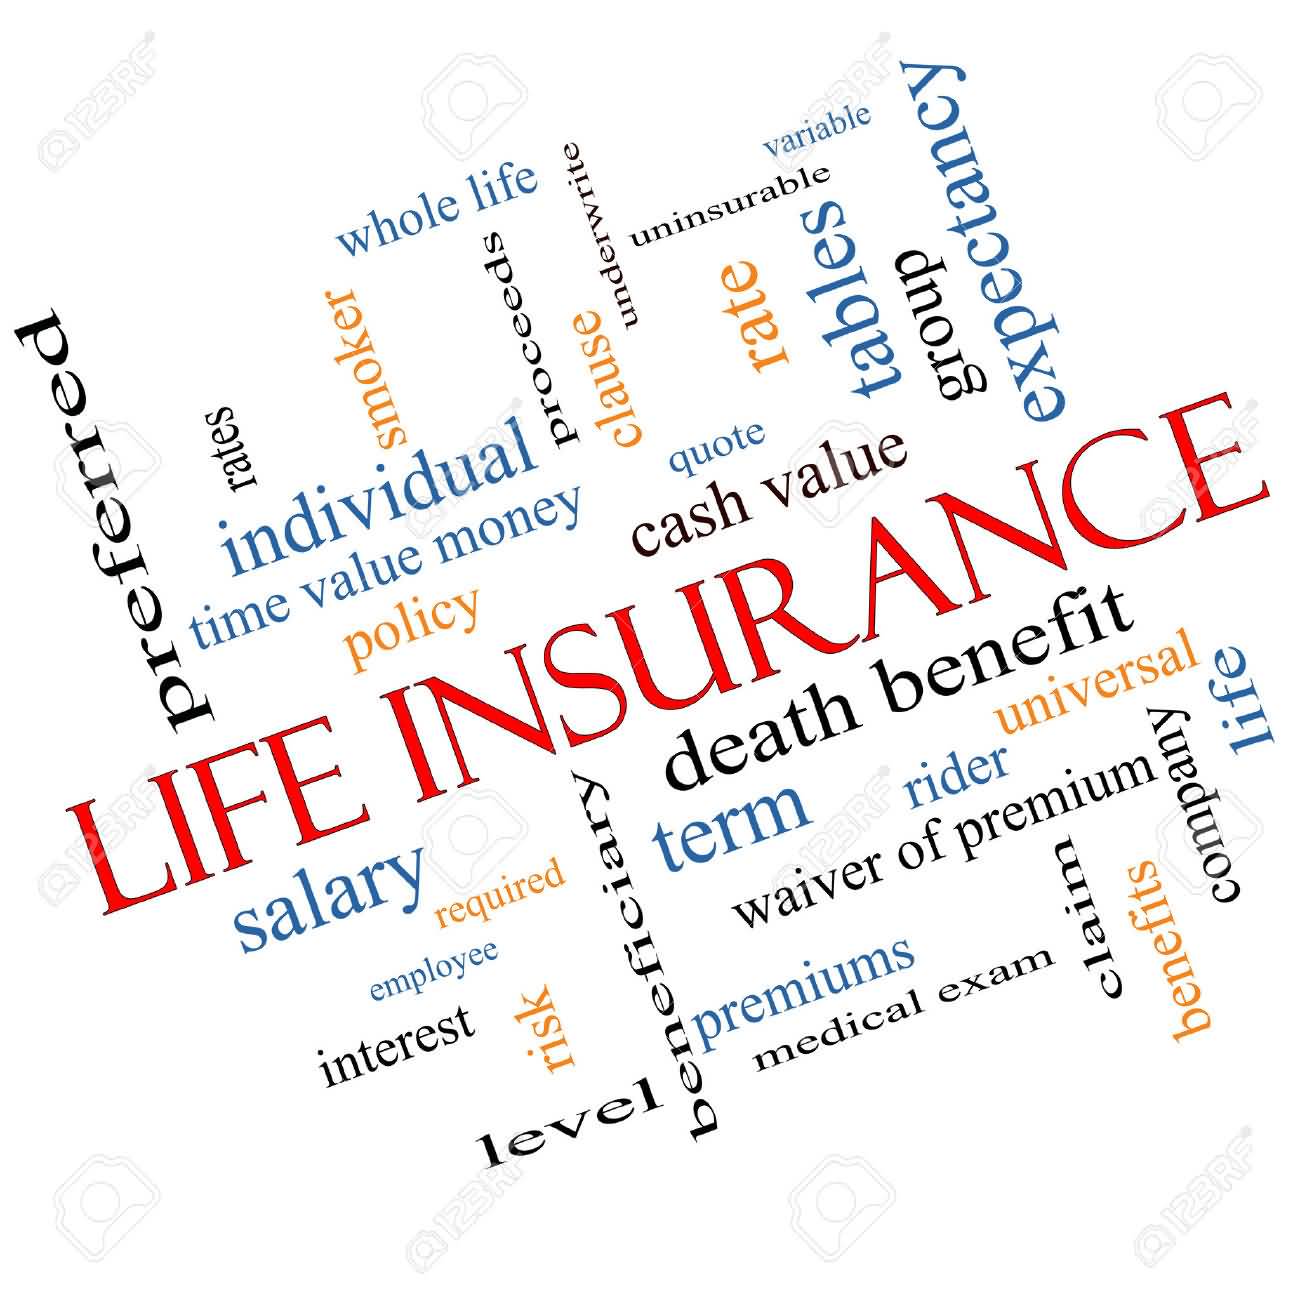 Quote Whole Life Insurance 13